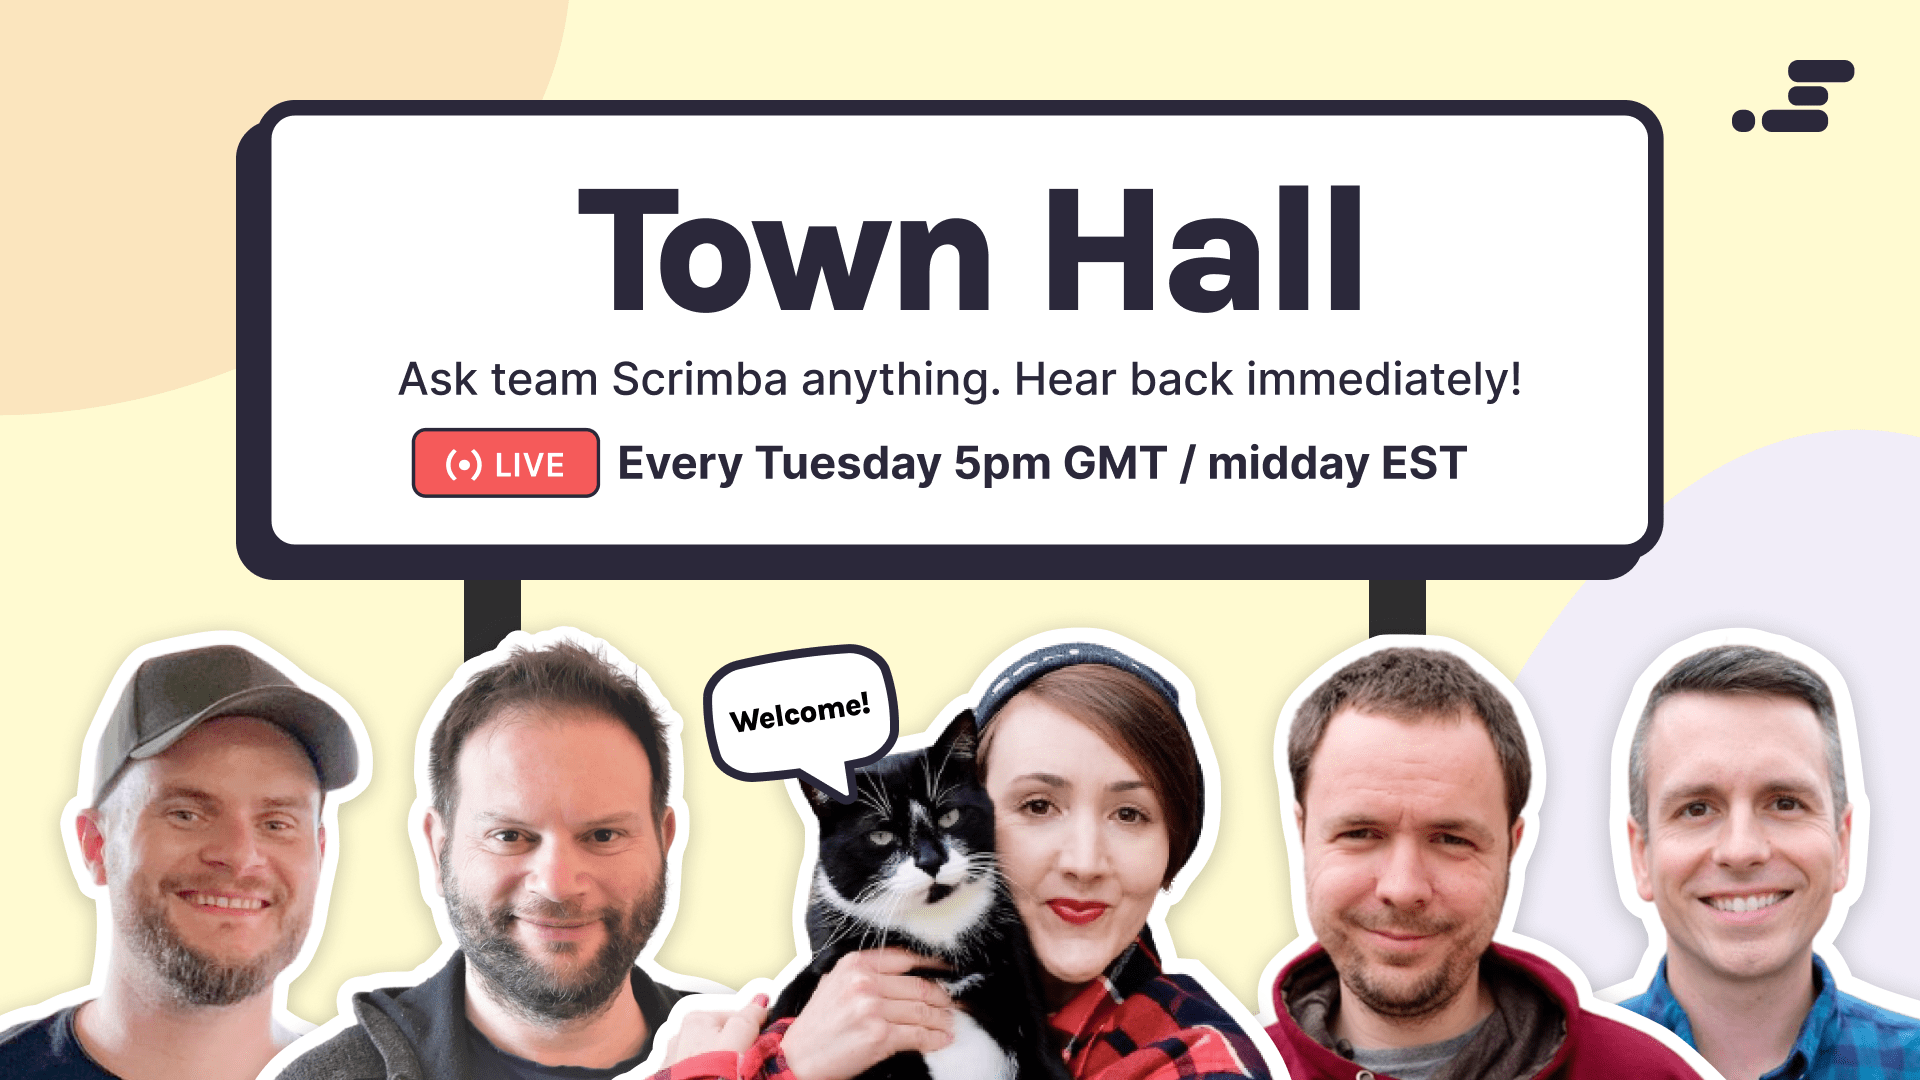 Town Hall - ask team Scrimba anything. Hear back immediately! Live every Tuesday 5pm GMT/Midday EST. Various members of the Scrimba team smiling and Pumpkin the tuxedo cat saying 'Welcome' in a speech bubble.